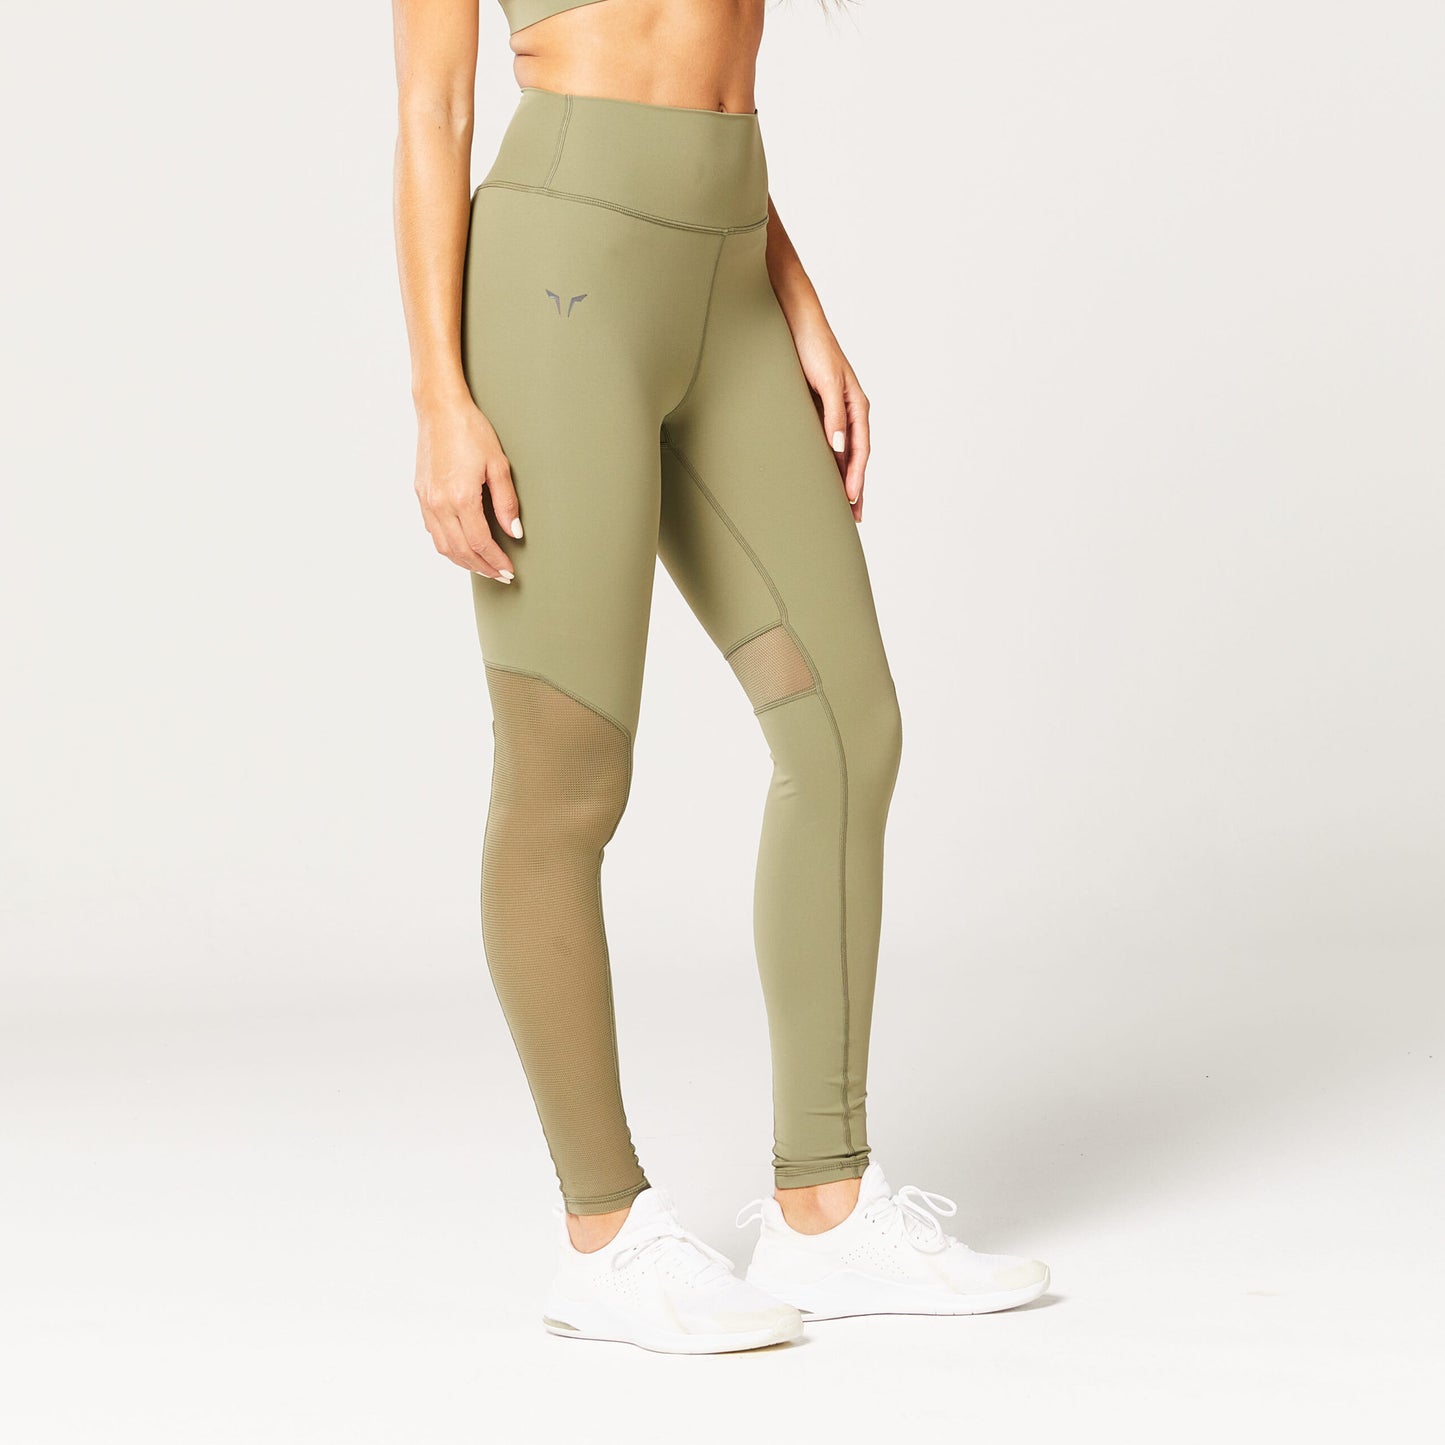 squatwolf-workout-clothes-code-live-in-leggings-green-gym-leggings-for-women